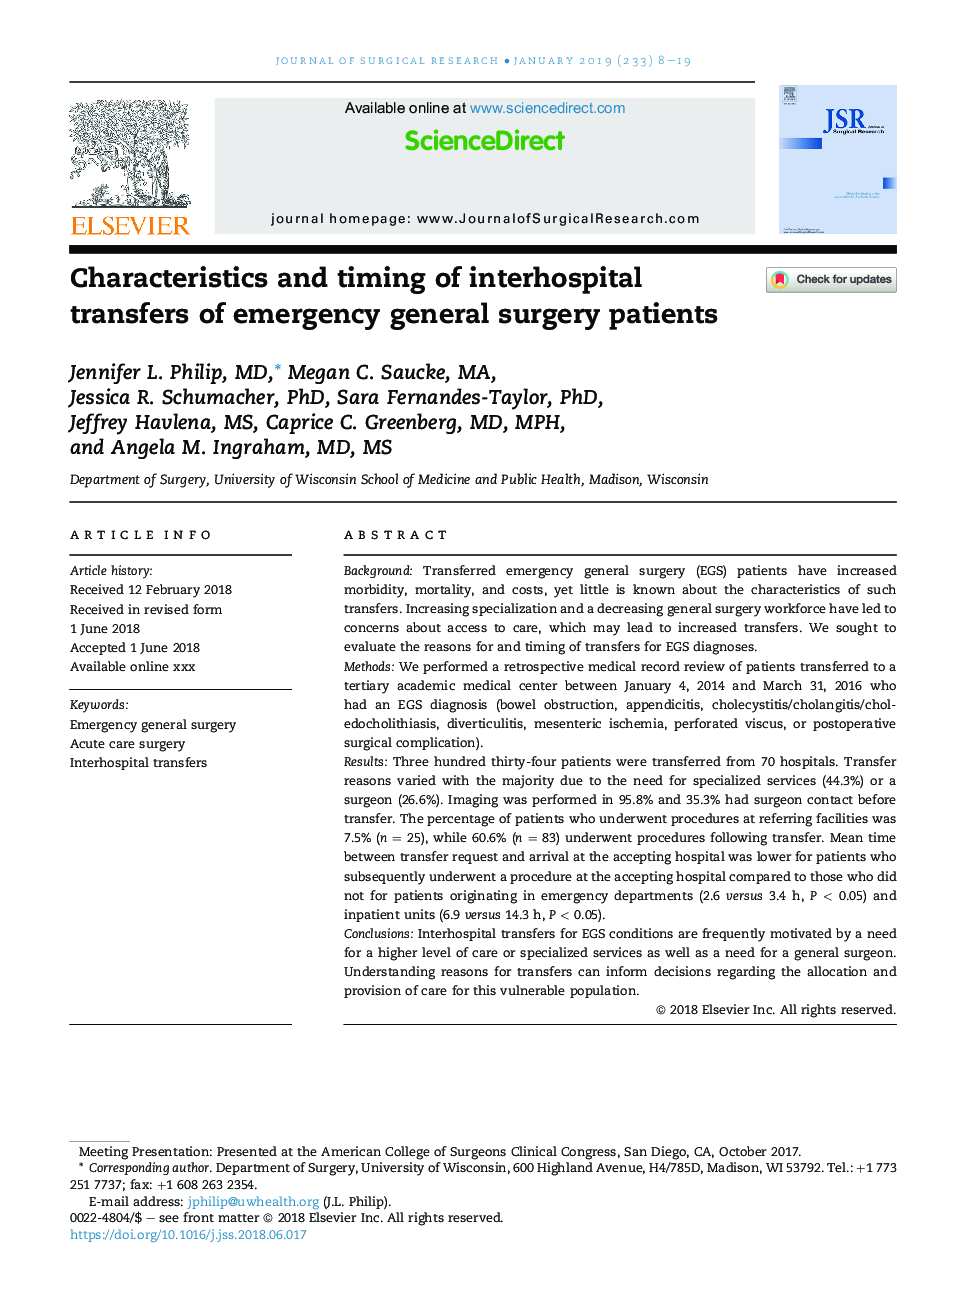 Characteristics and timing of interhospital transfers of emergency general surgery patients